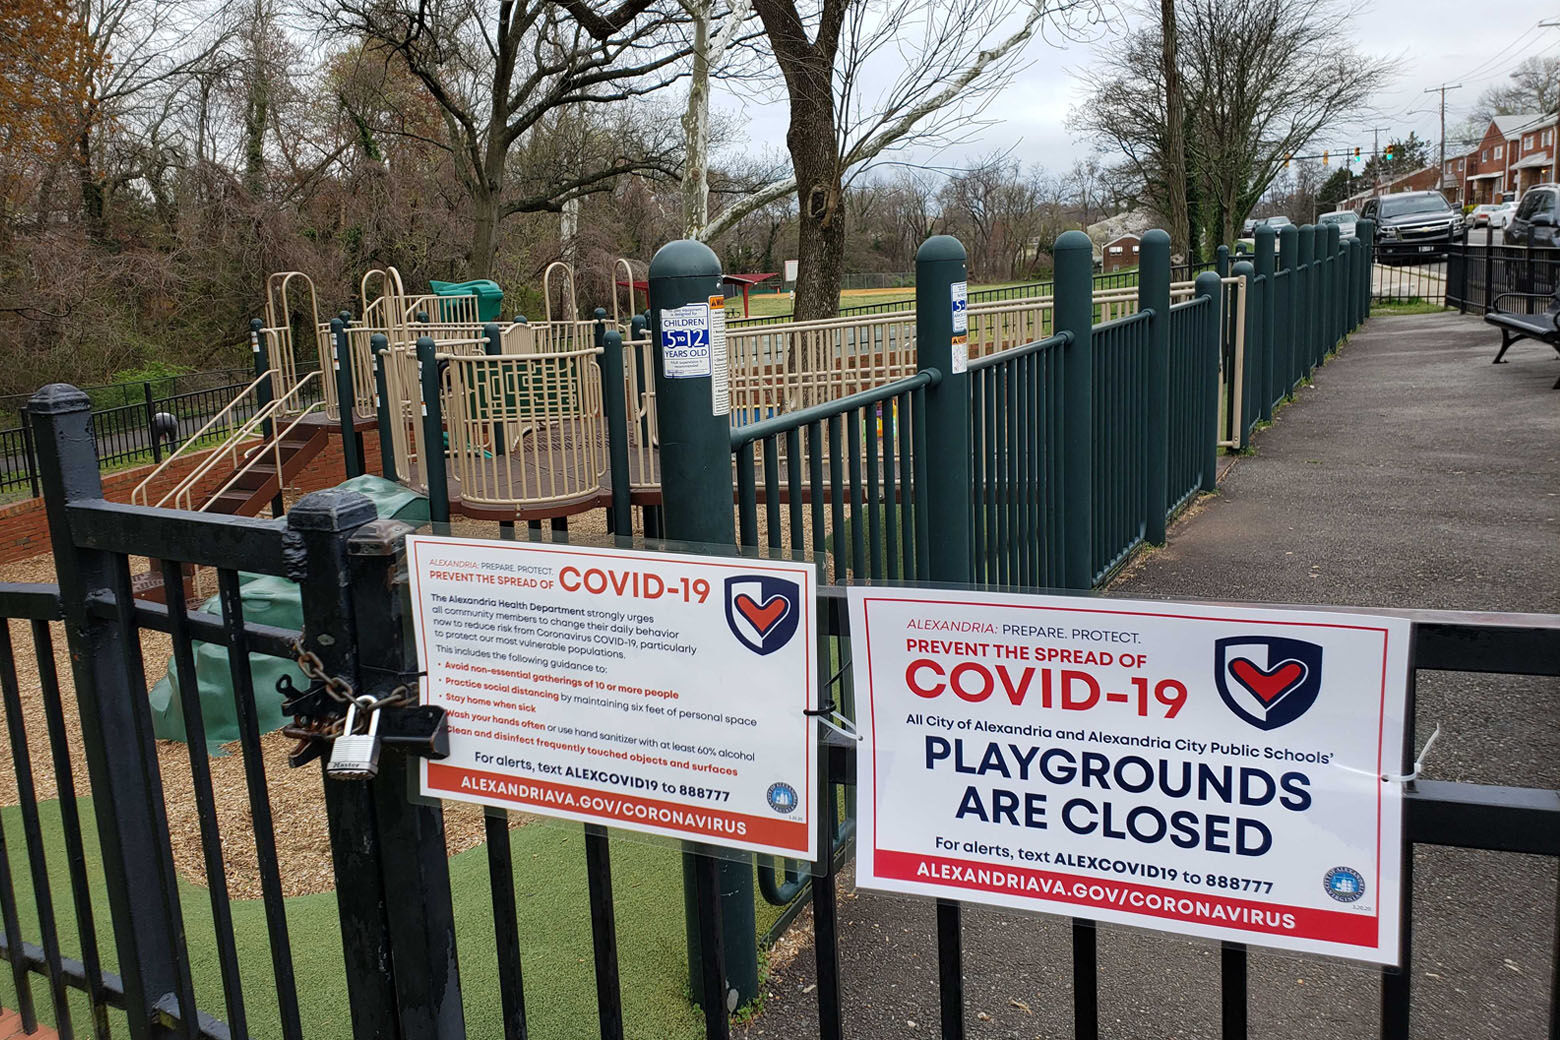 Playgrounds, like this one in Alexandria's Angel Park, are closed.